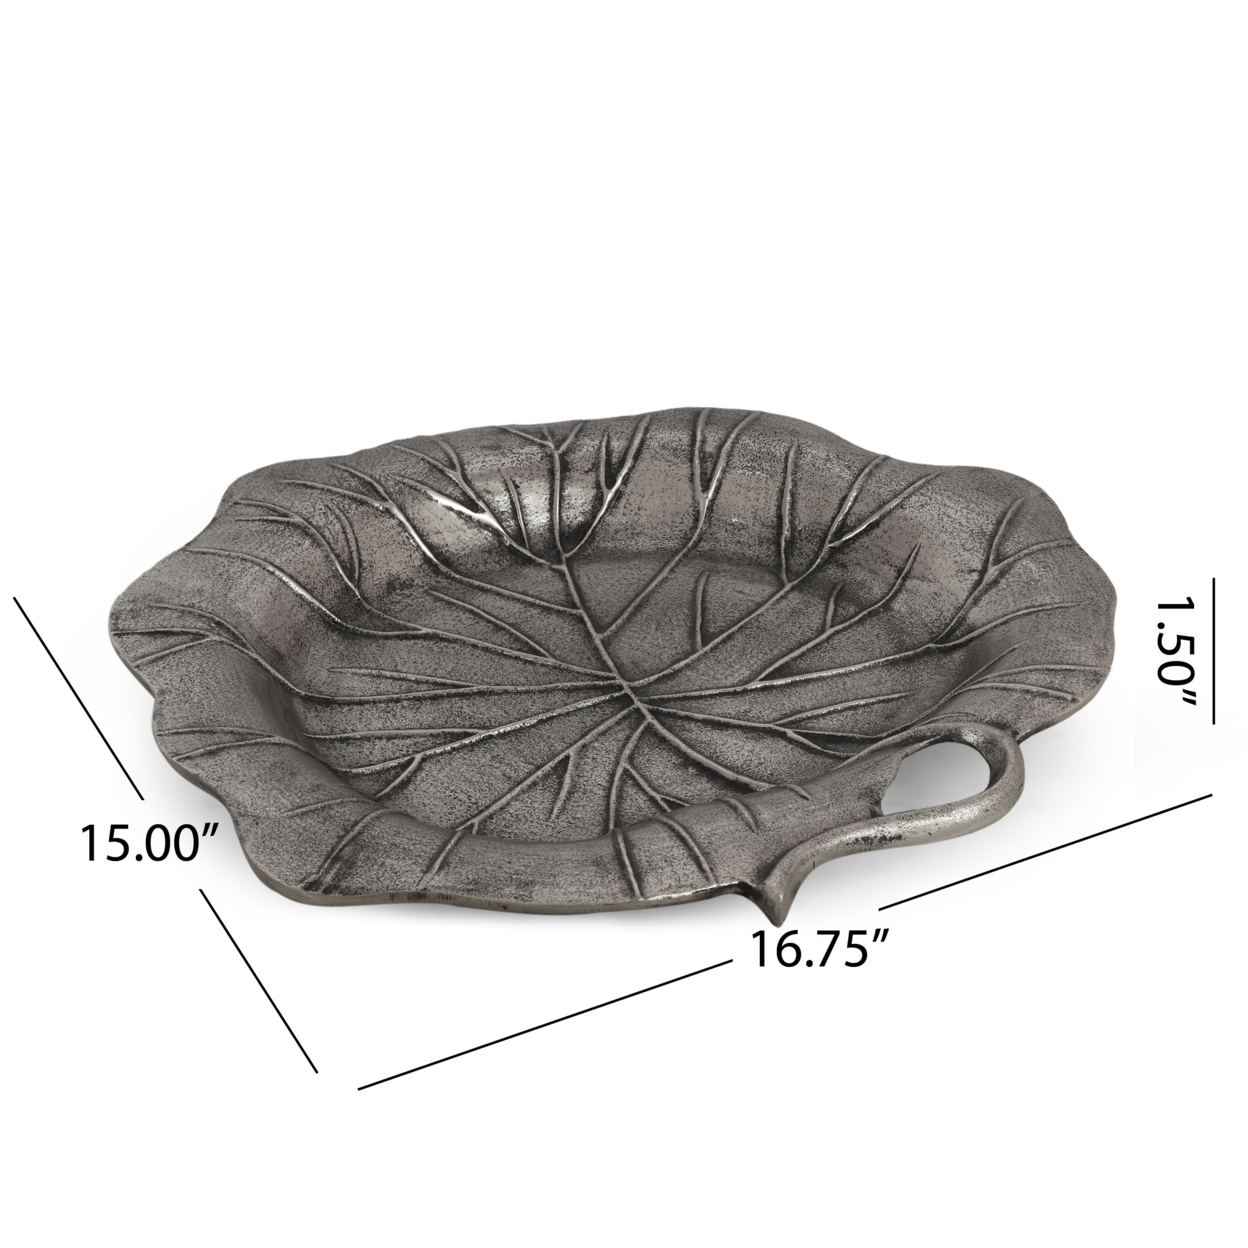 Lovejoy Handcrafted Aluminum Leaf Dish